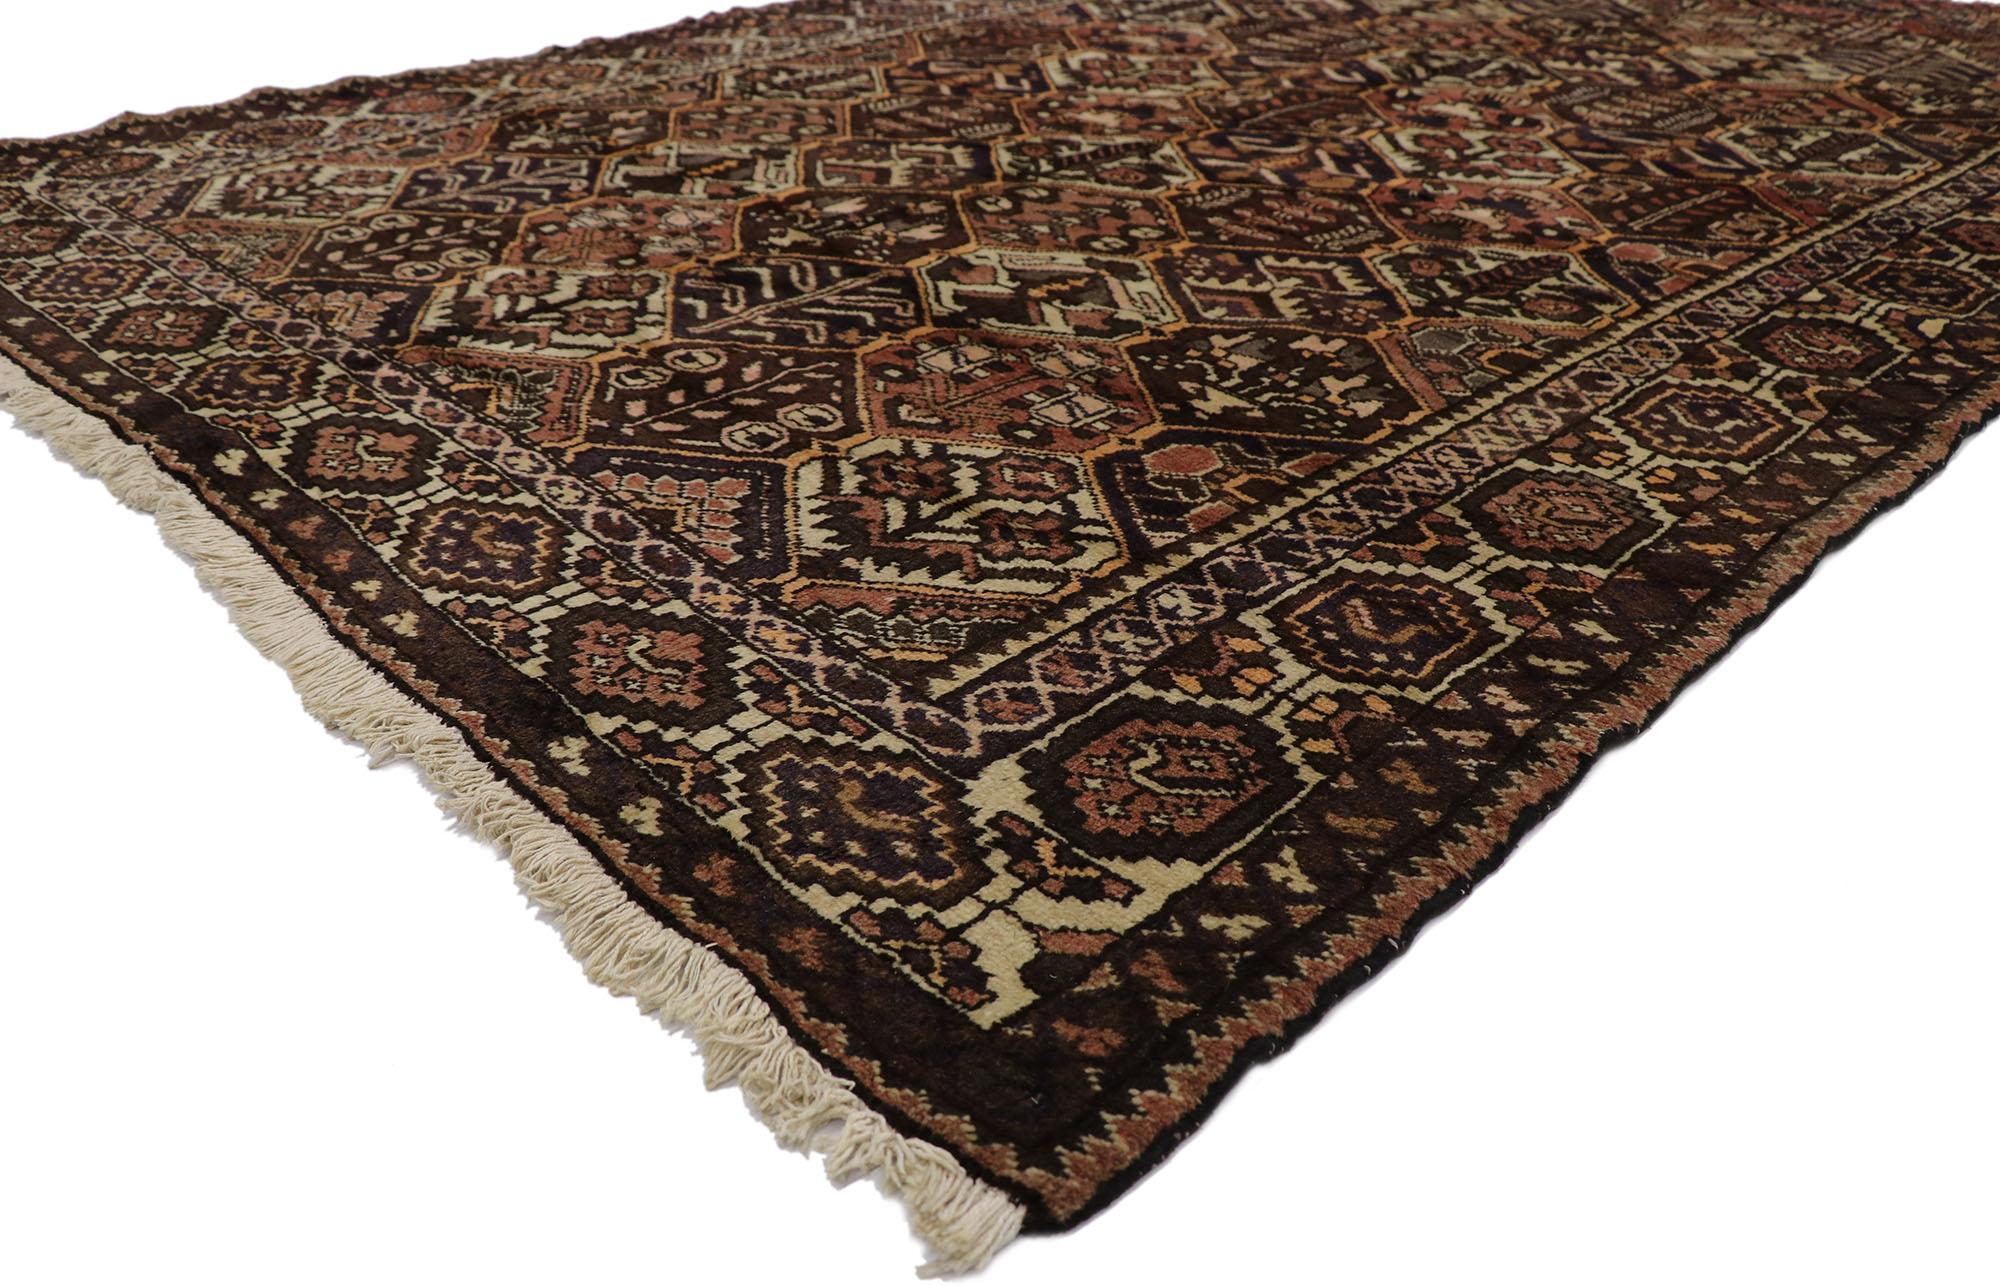 21689 Antique Persian Bakhtiari Rug 06'02 x 09'10. Originating from the rugged Zagros Mountains of Iran, Persian Bakhtiari rugs command reverence for their unparalleled craftsmanship and rich cultural heritage. Skillful artisans from the Bakhtiari